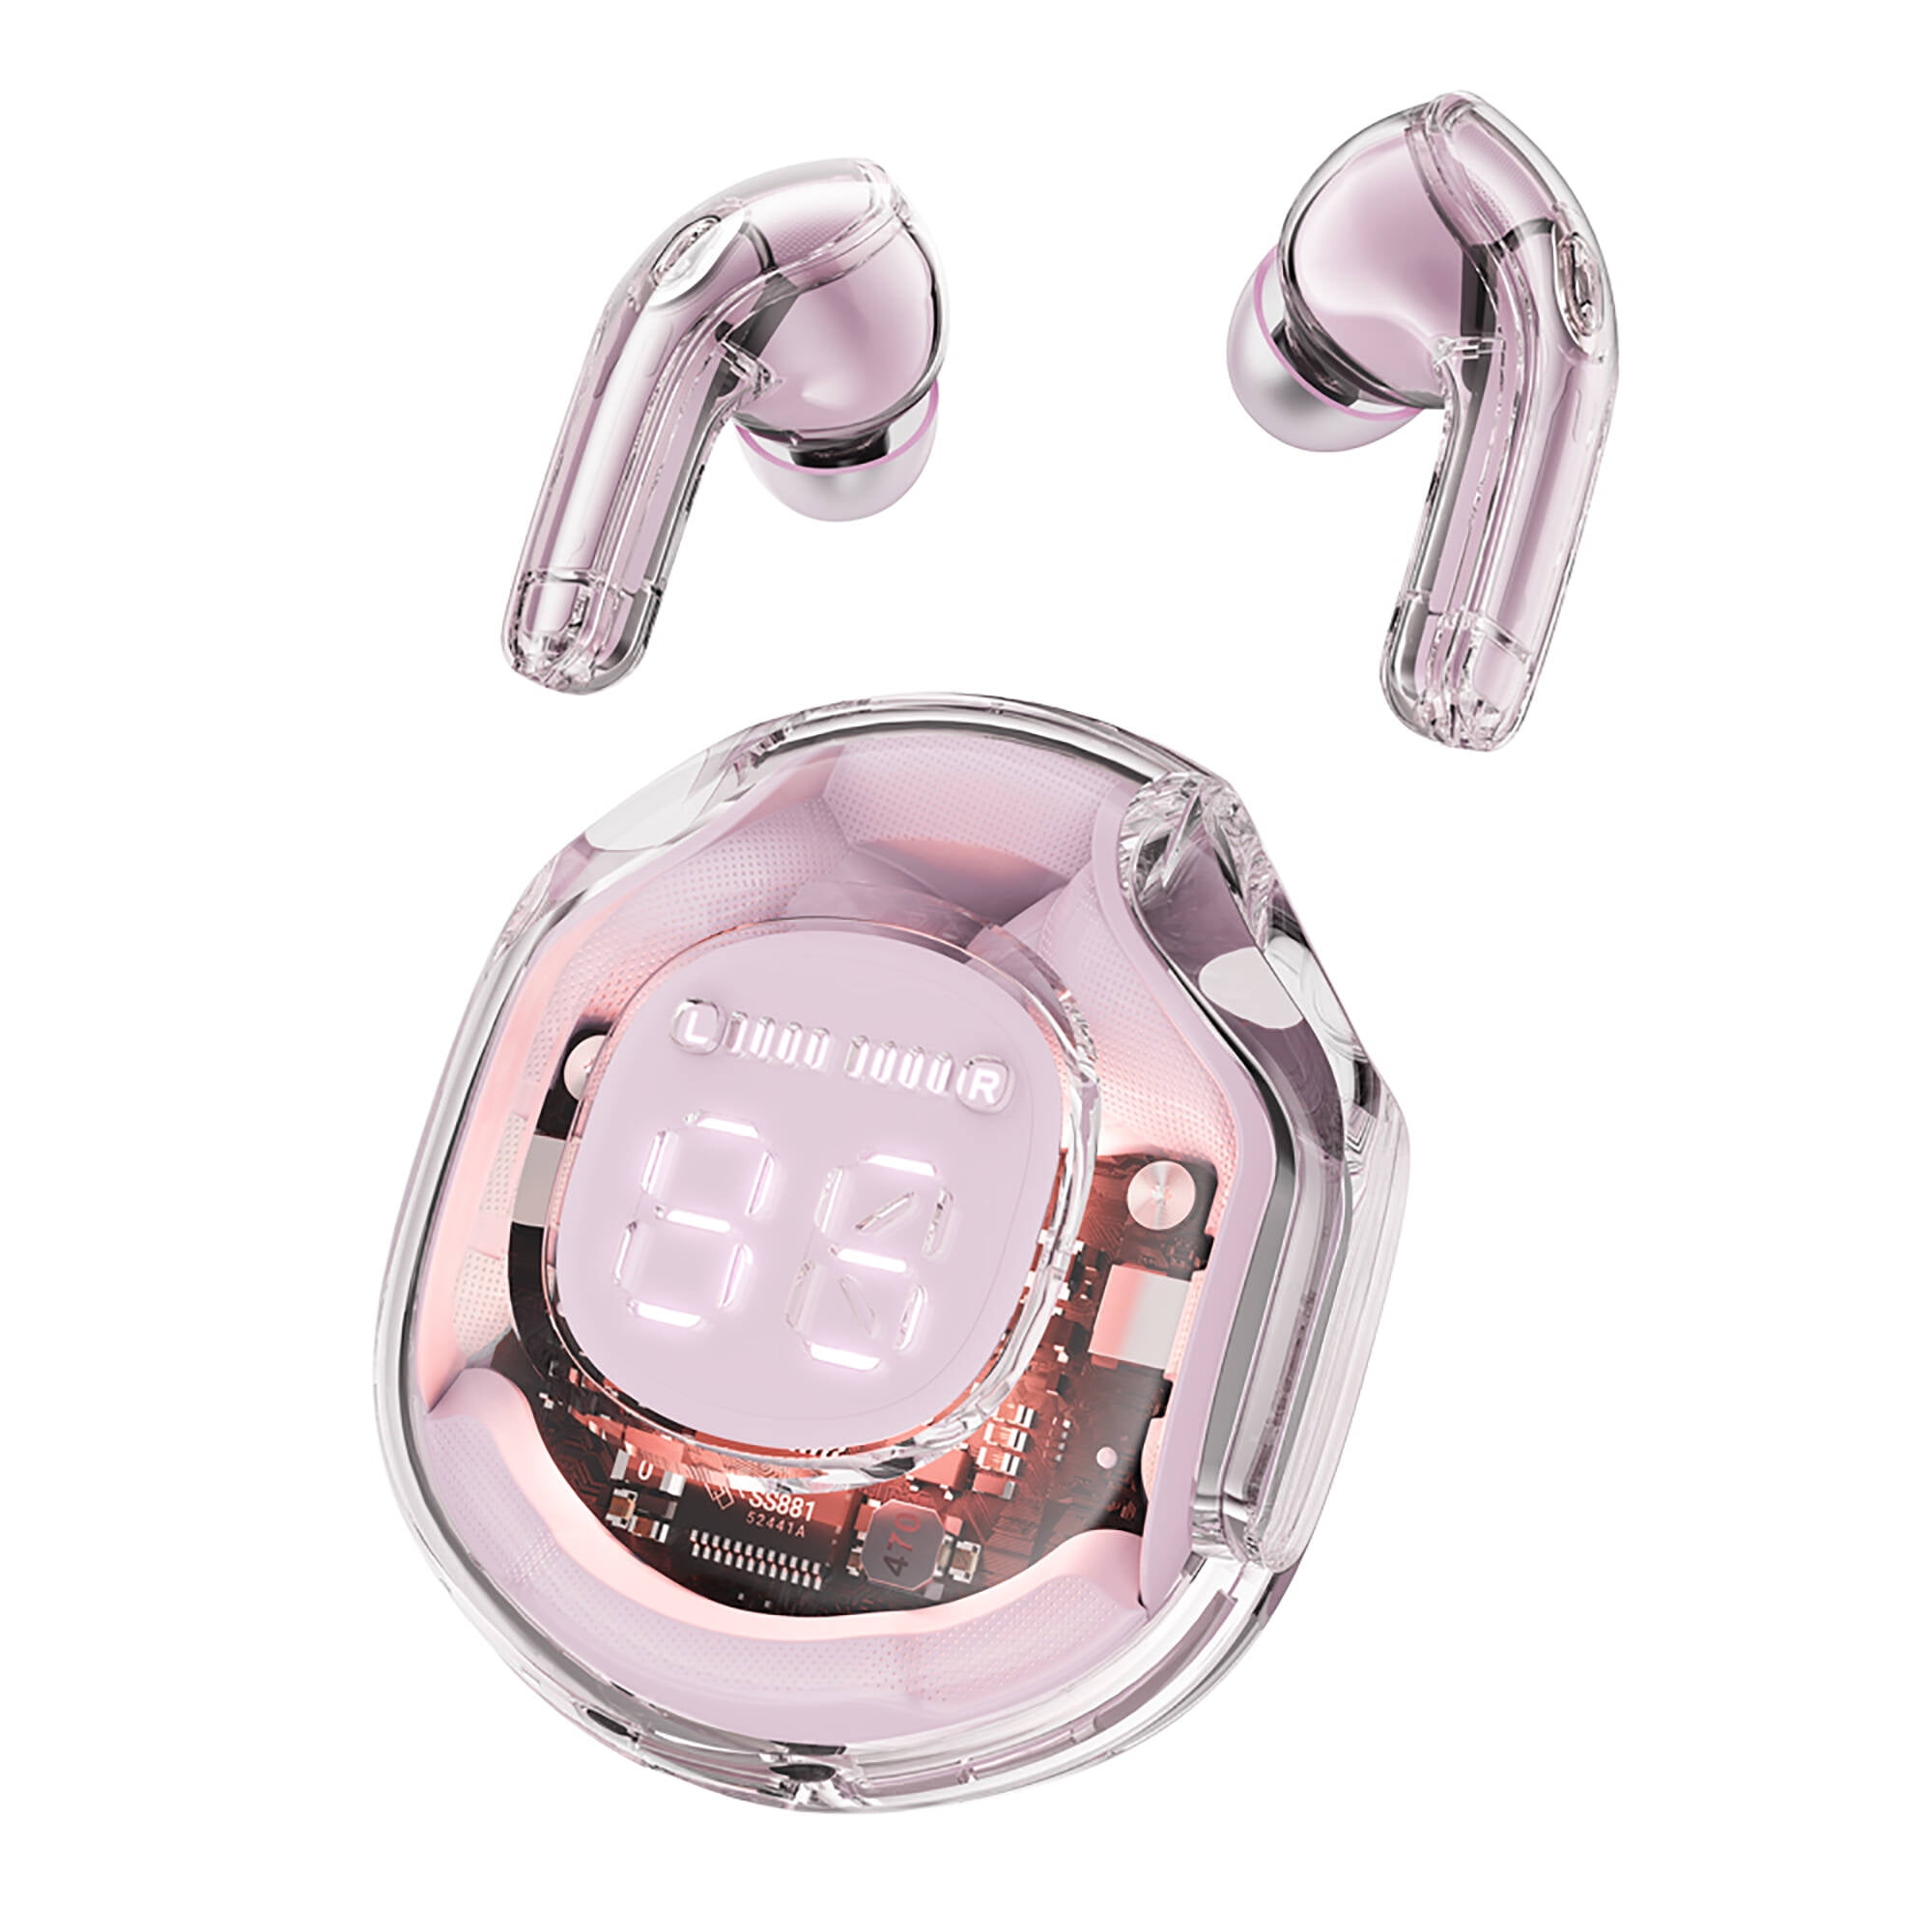 ACEFAST TWS Wireless Bluetooth Earbuds Bass Stereo Noise Reduction Headset with Mic in Ear Headphones for Iphone/Android (Lotus Pink)